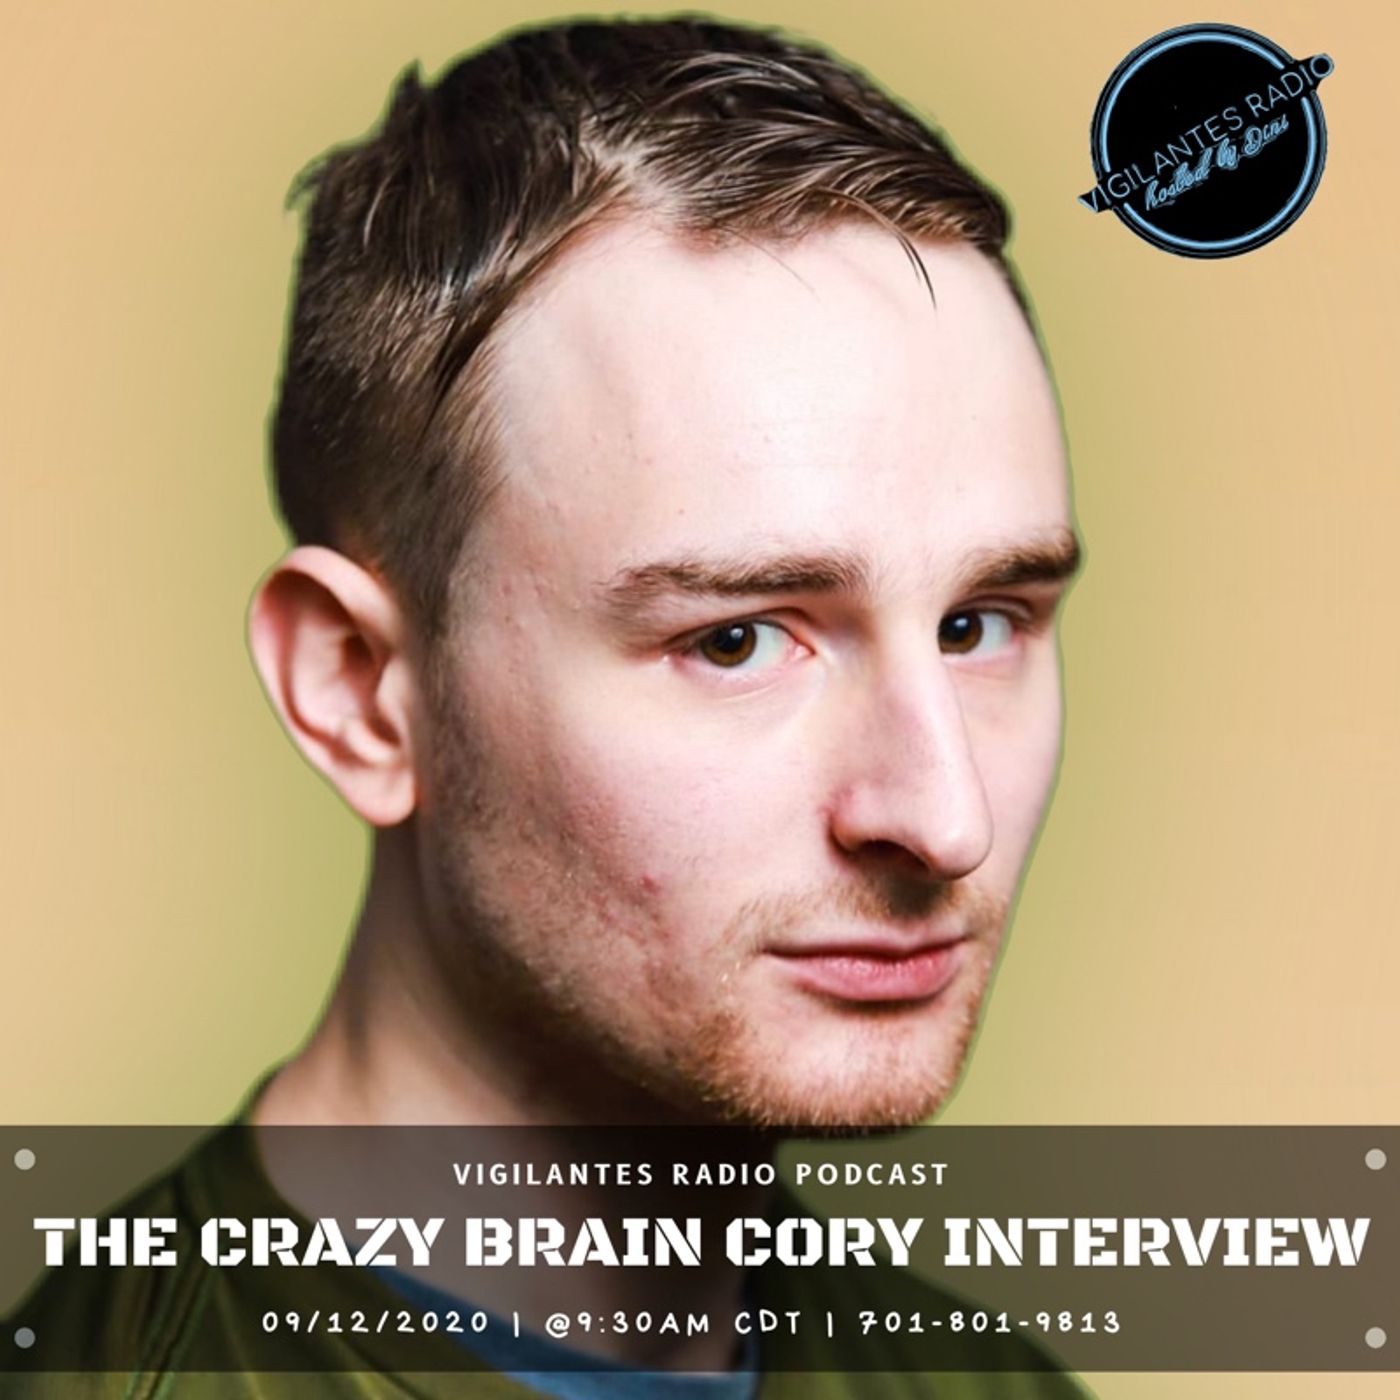 The Crazy Brain Cory Interview. Image